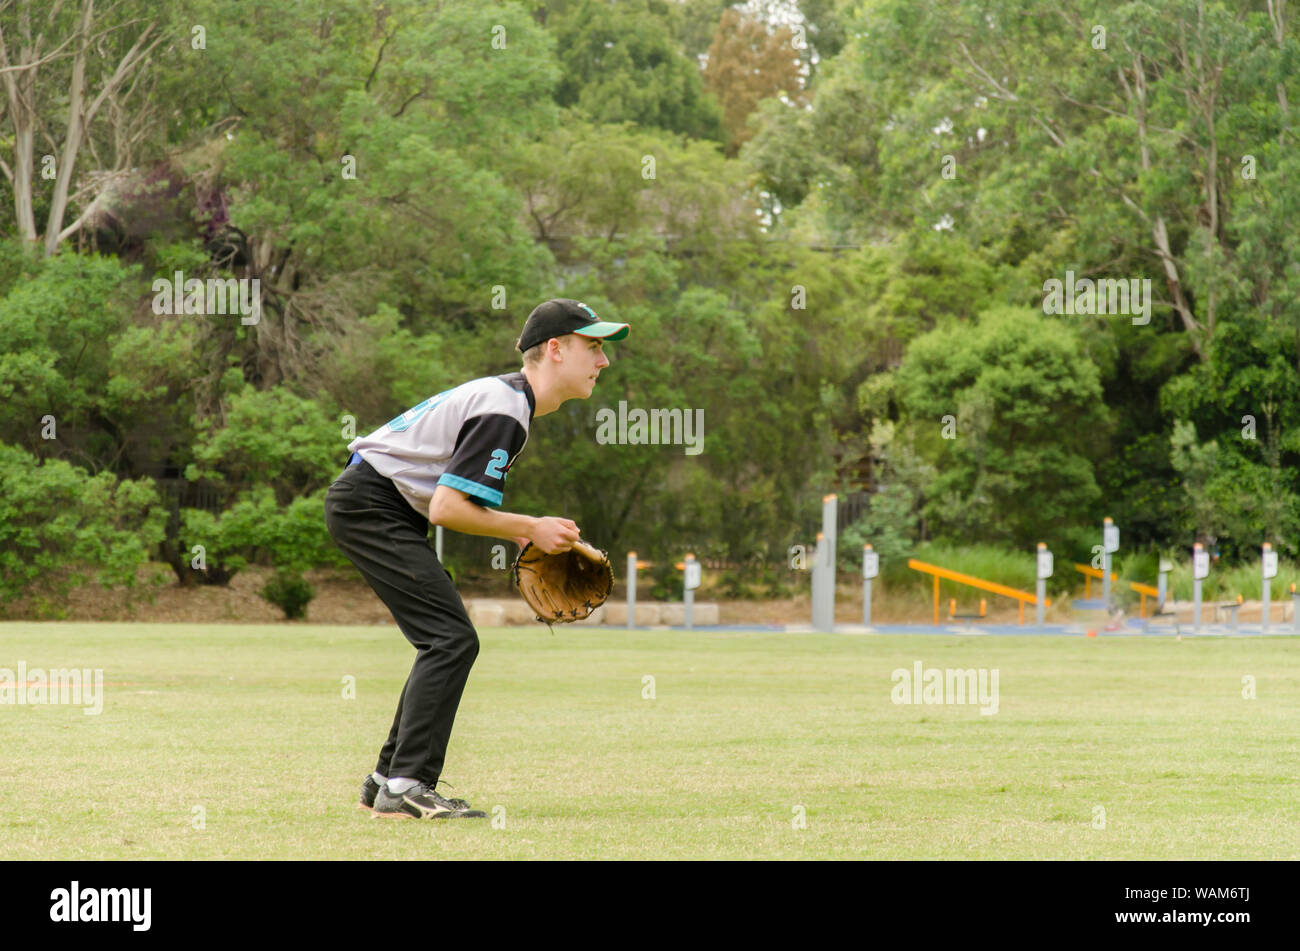 A young 18 year old Australian male baseball player at a Saturday game in Sydney, Australia Stock Photo